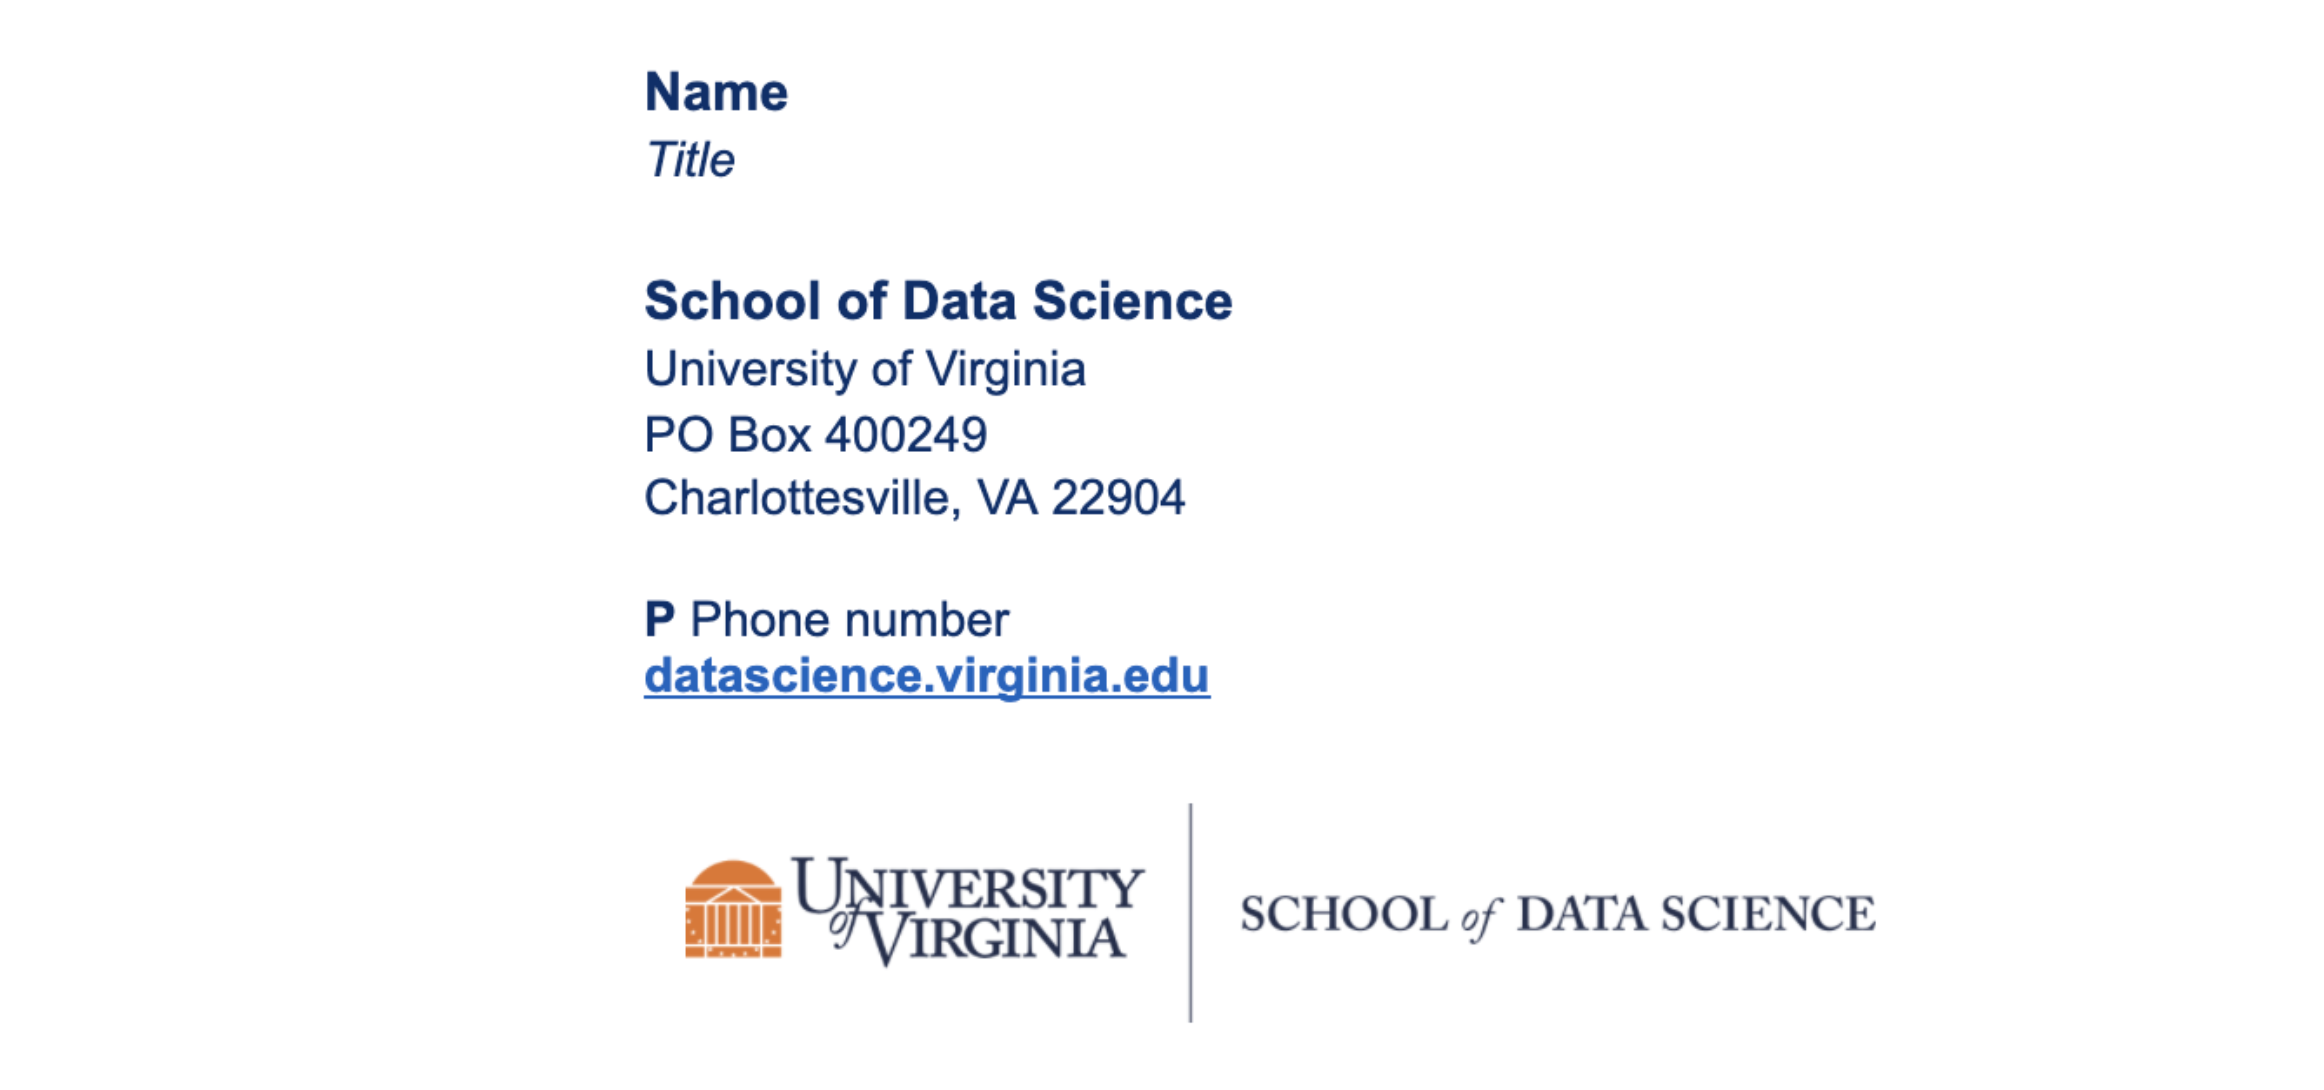 Email signature for School of Data Science